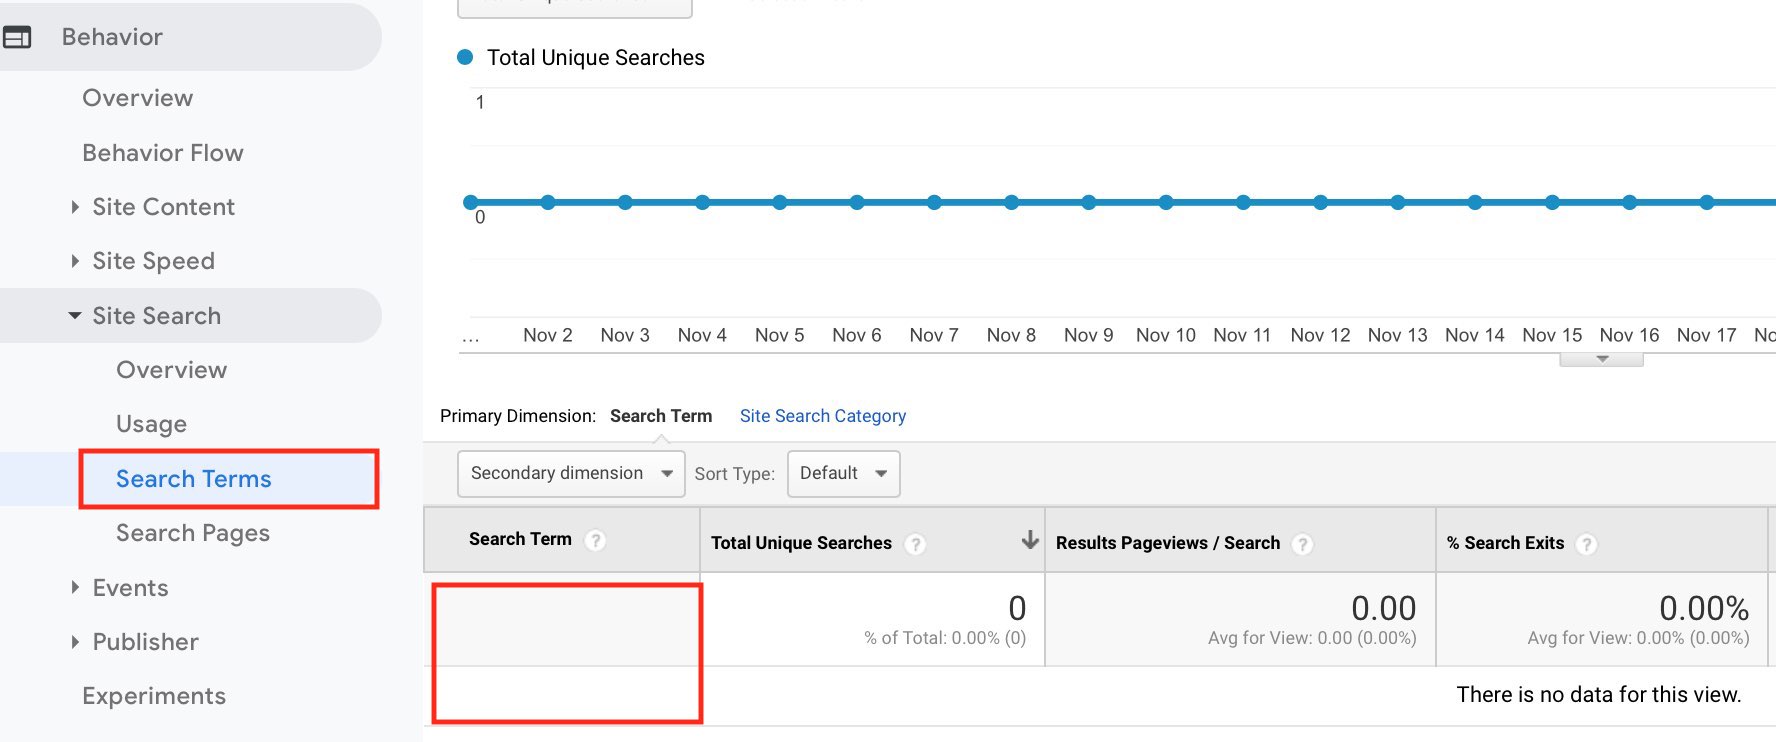 Site Search in Google Analytics